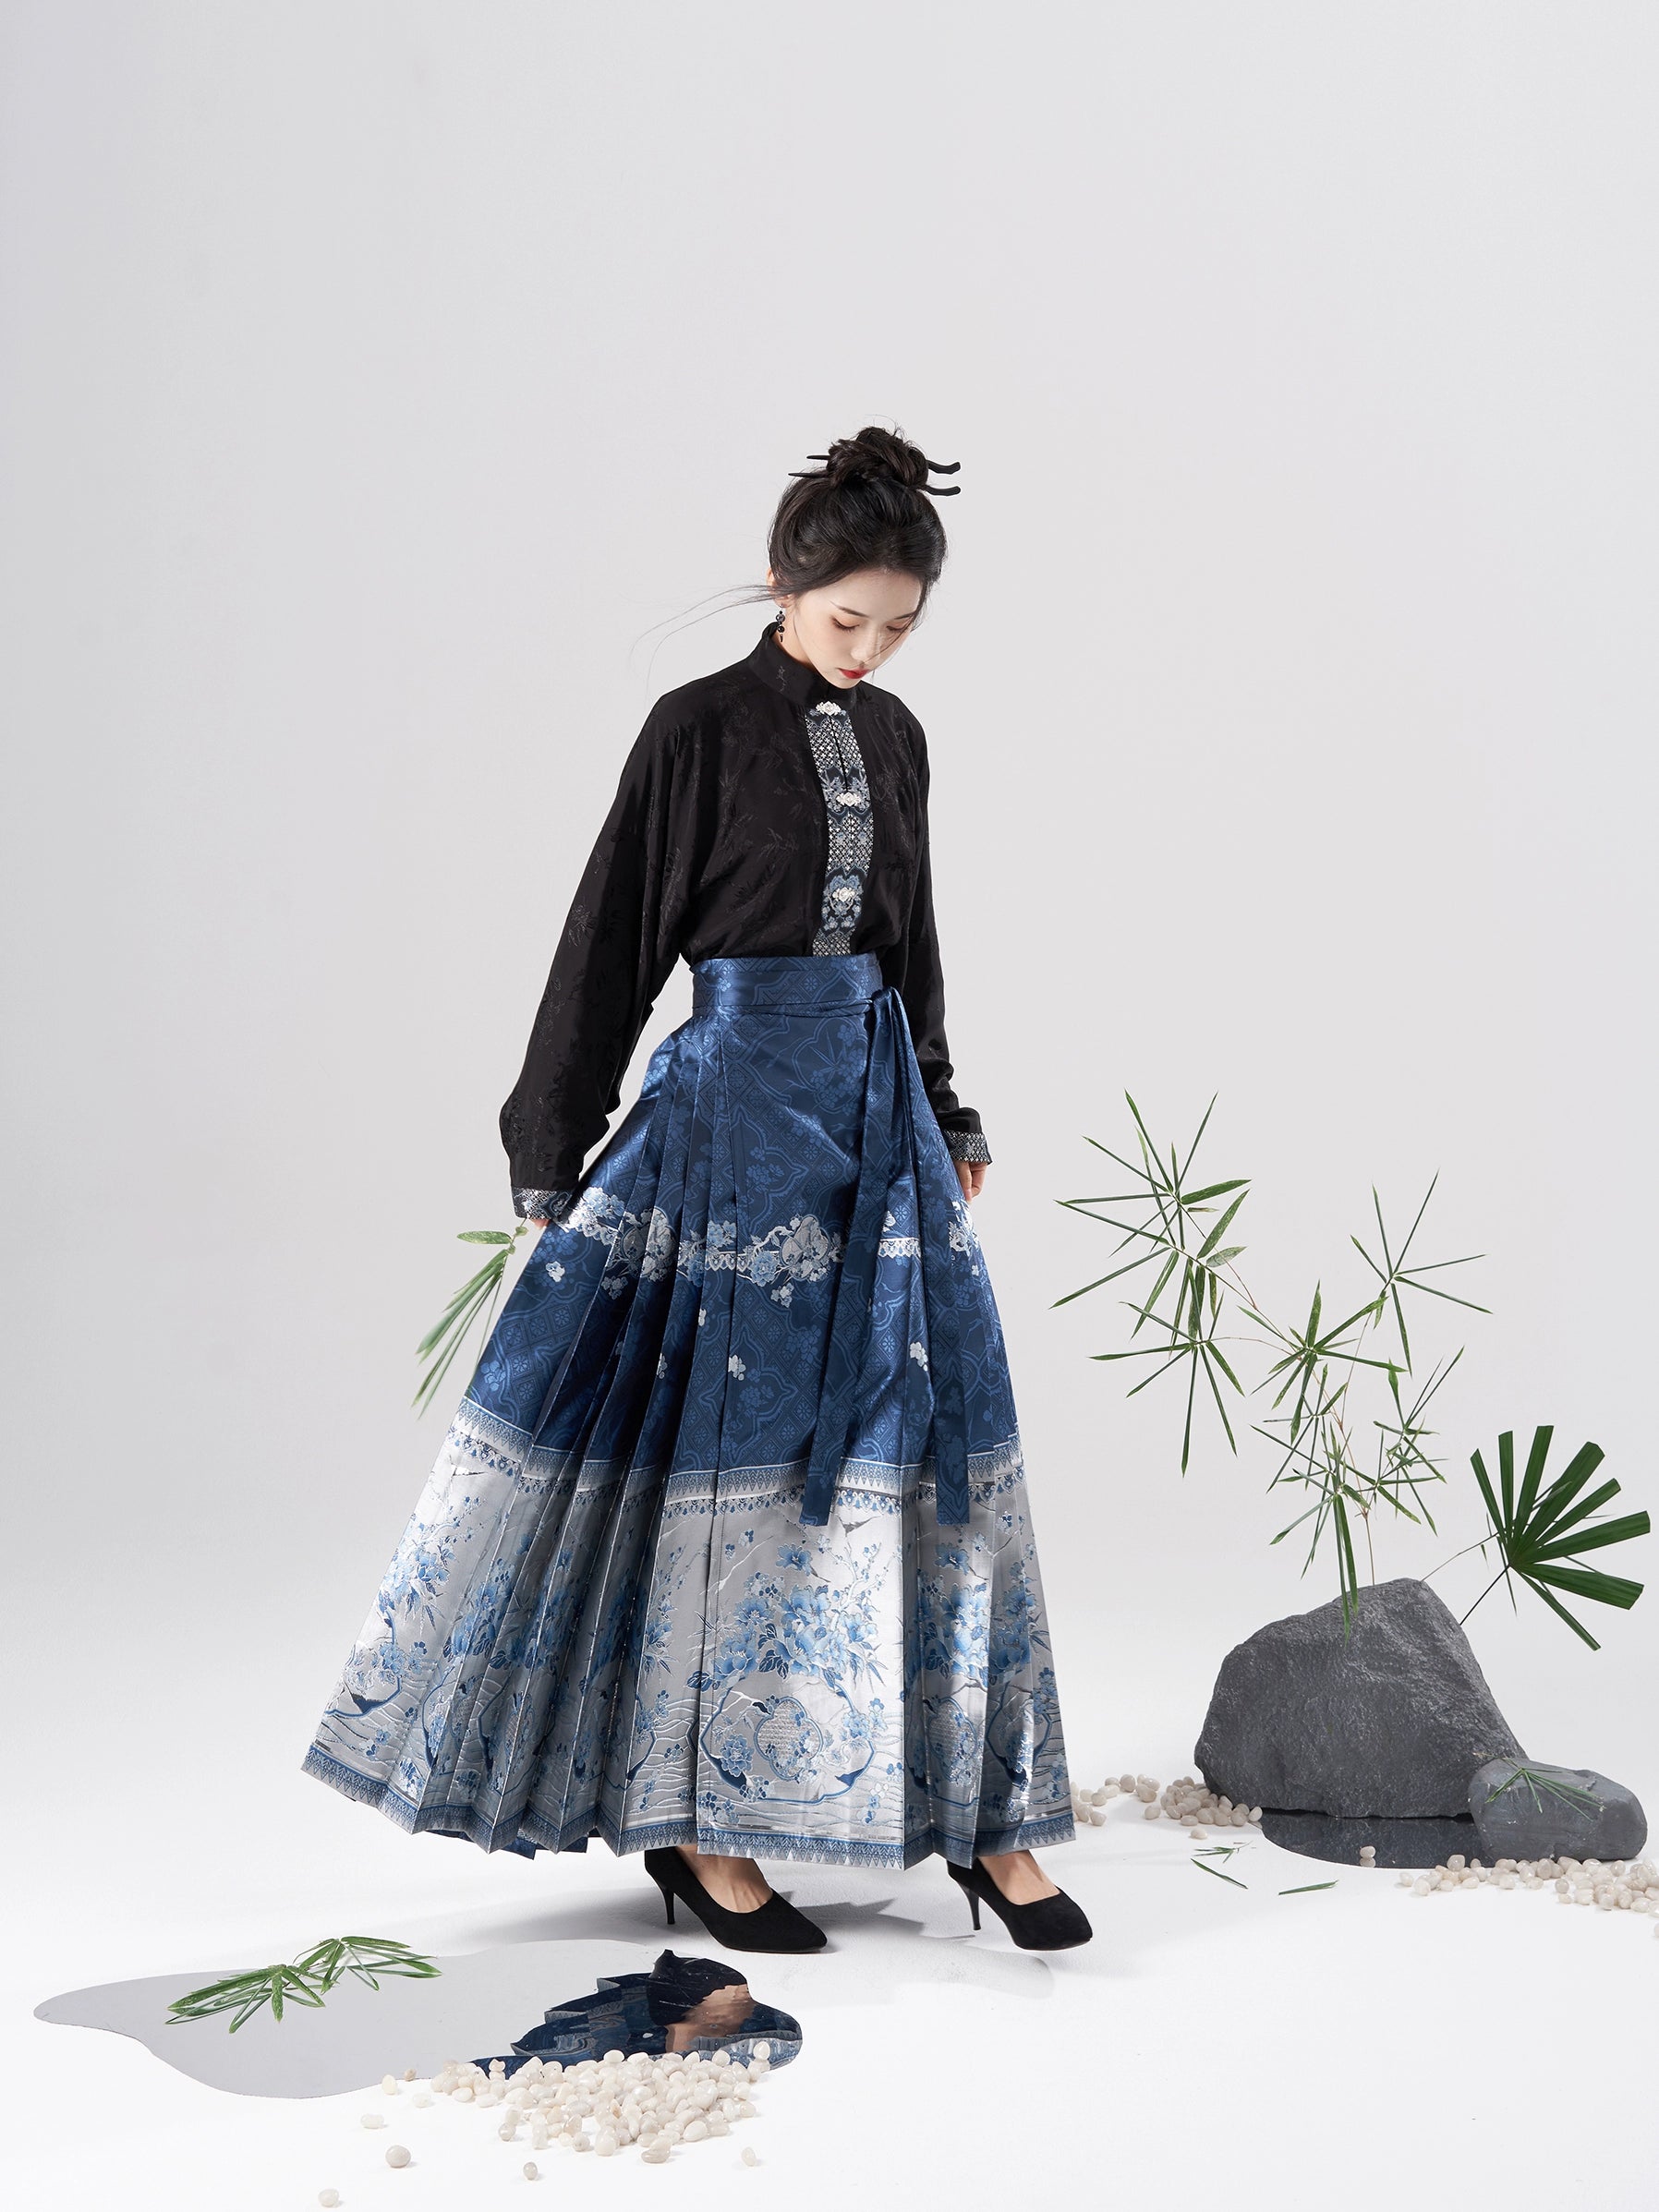 Qin Sang 秦桑 Mulberry Branches Modernized Ming Dynasty Mamian Skirt